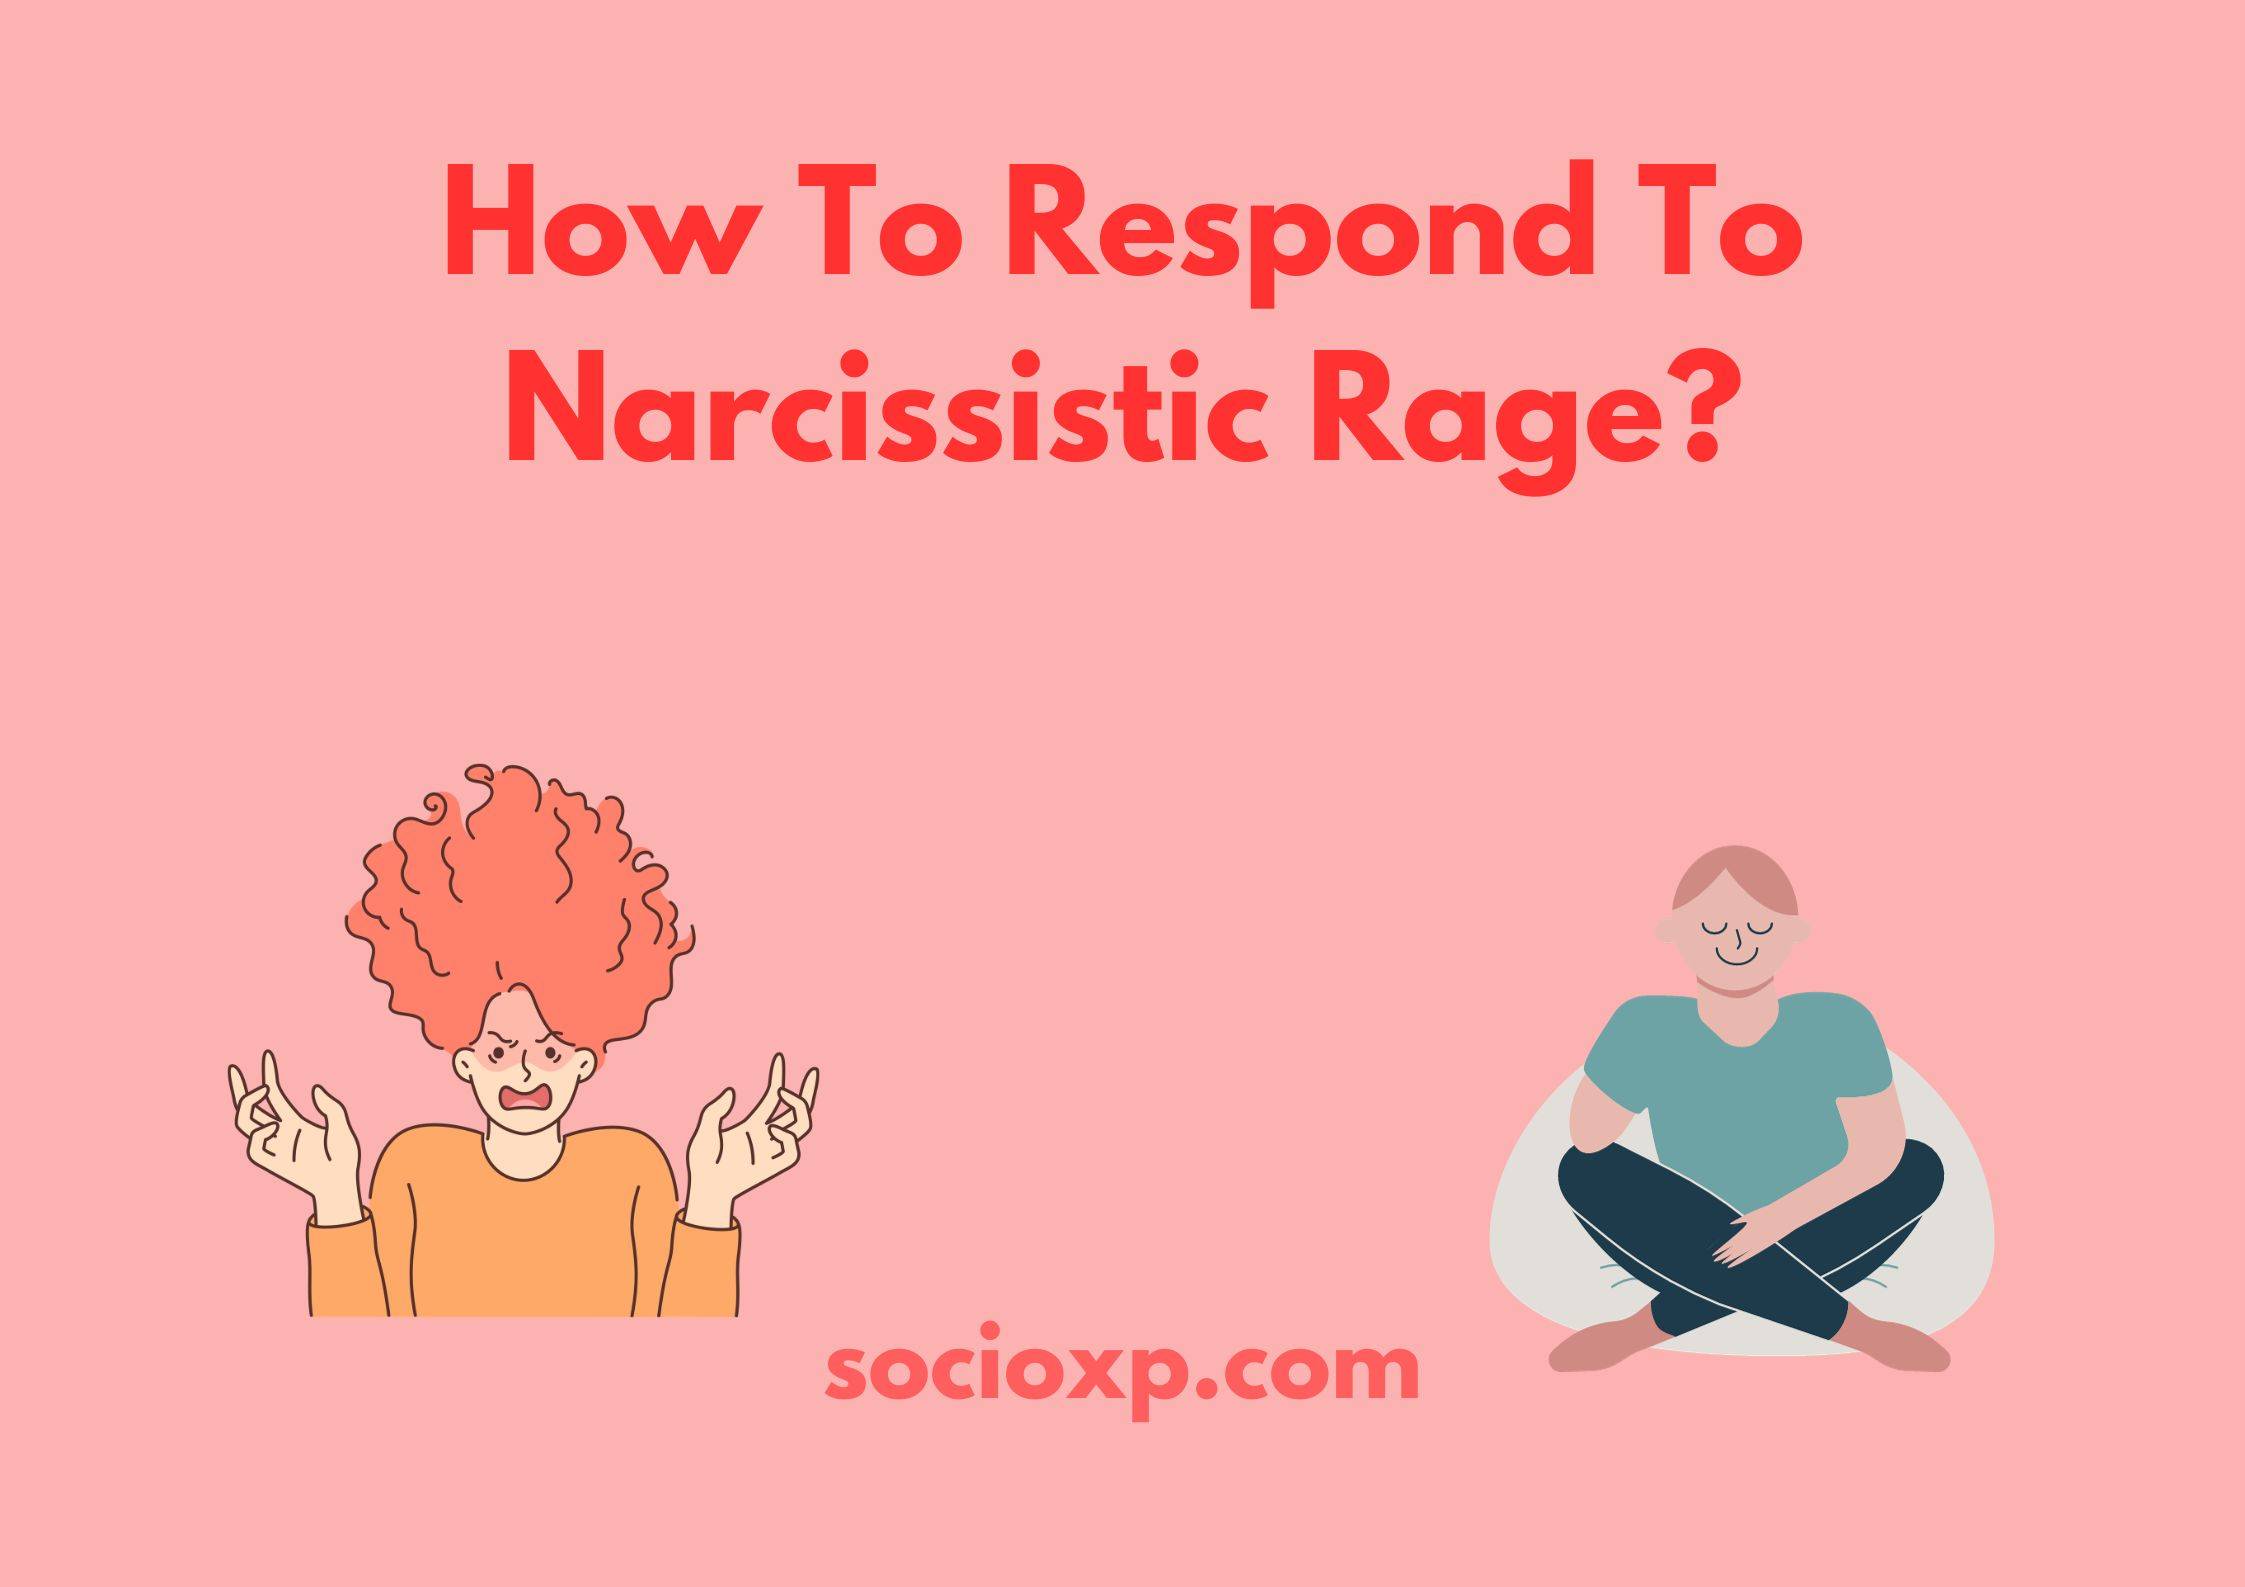 How To Respond To Narcissistic Rage?